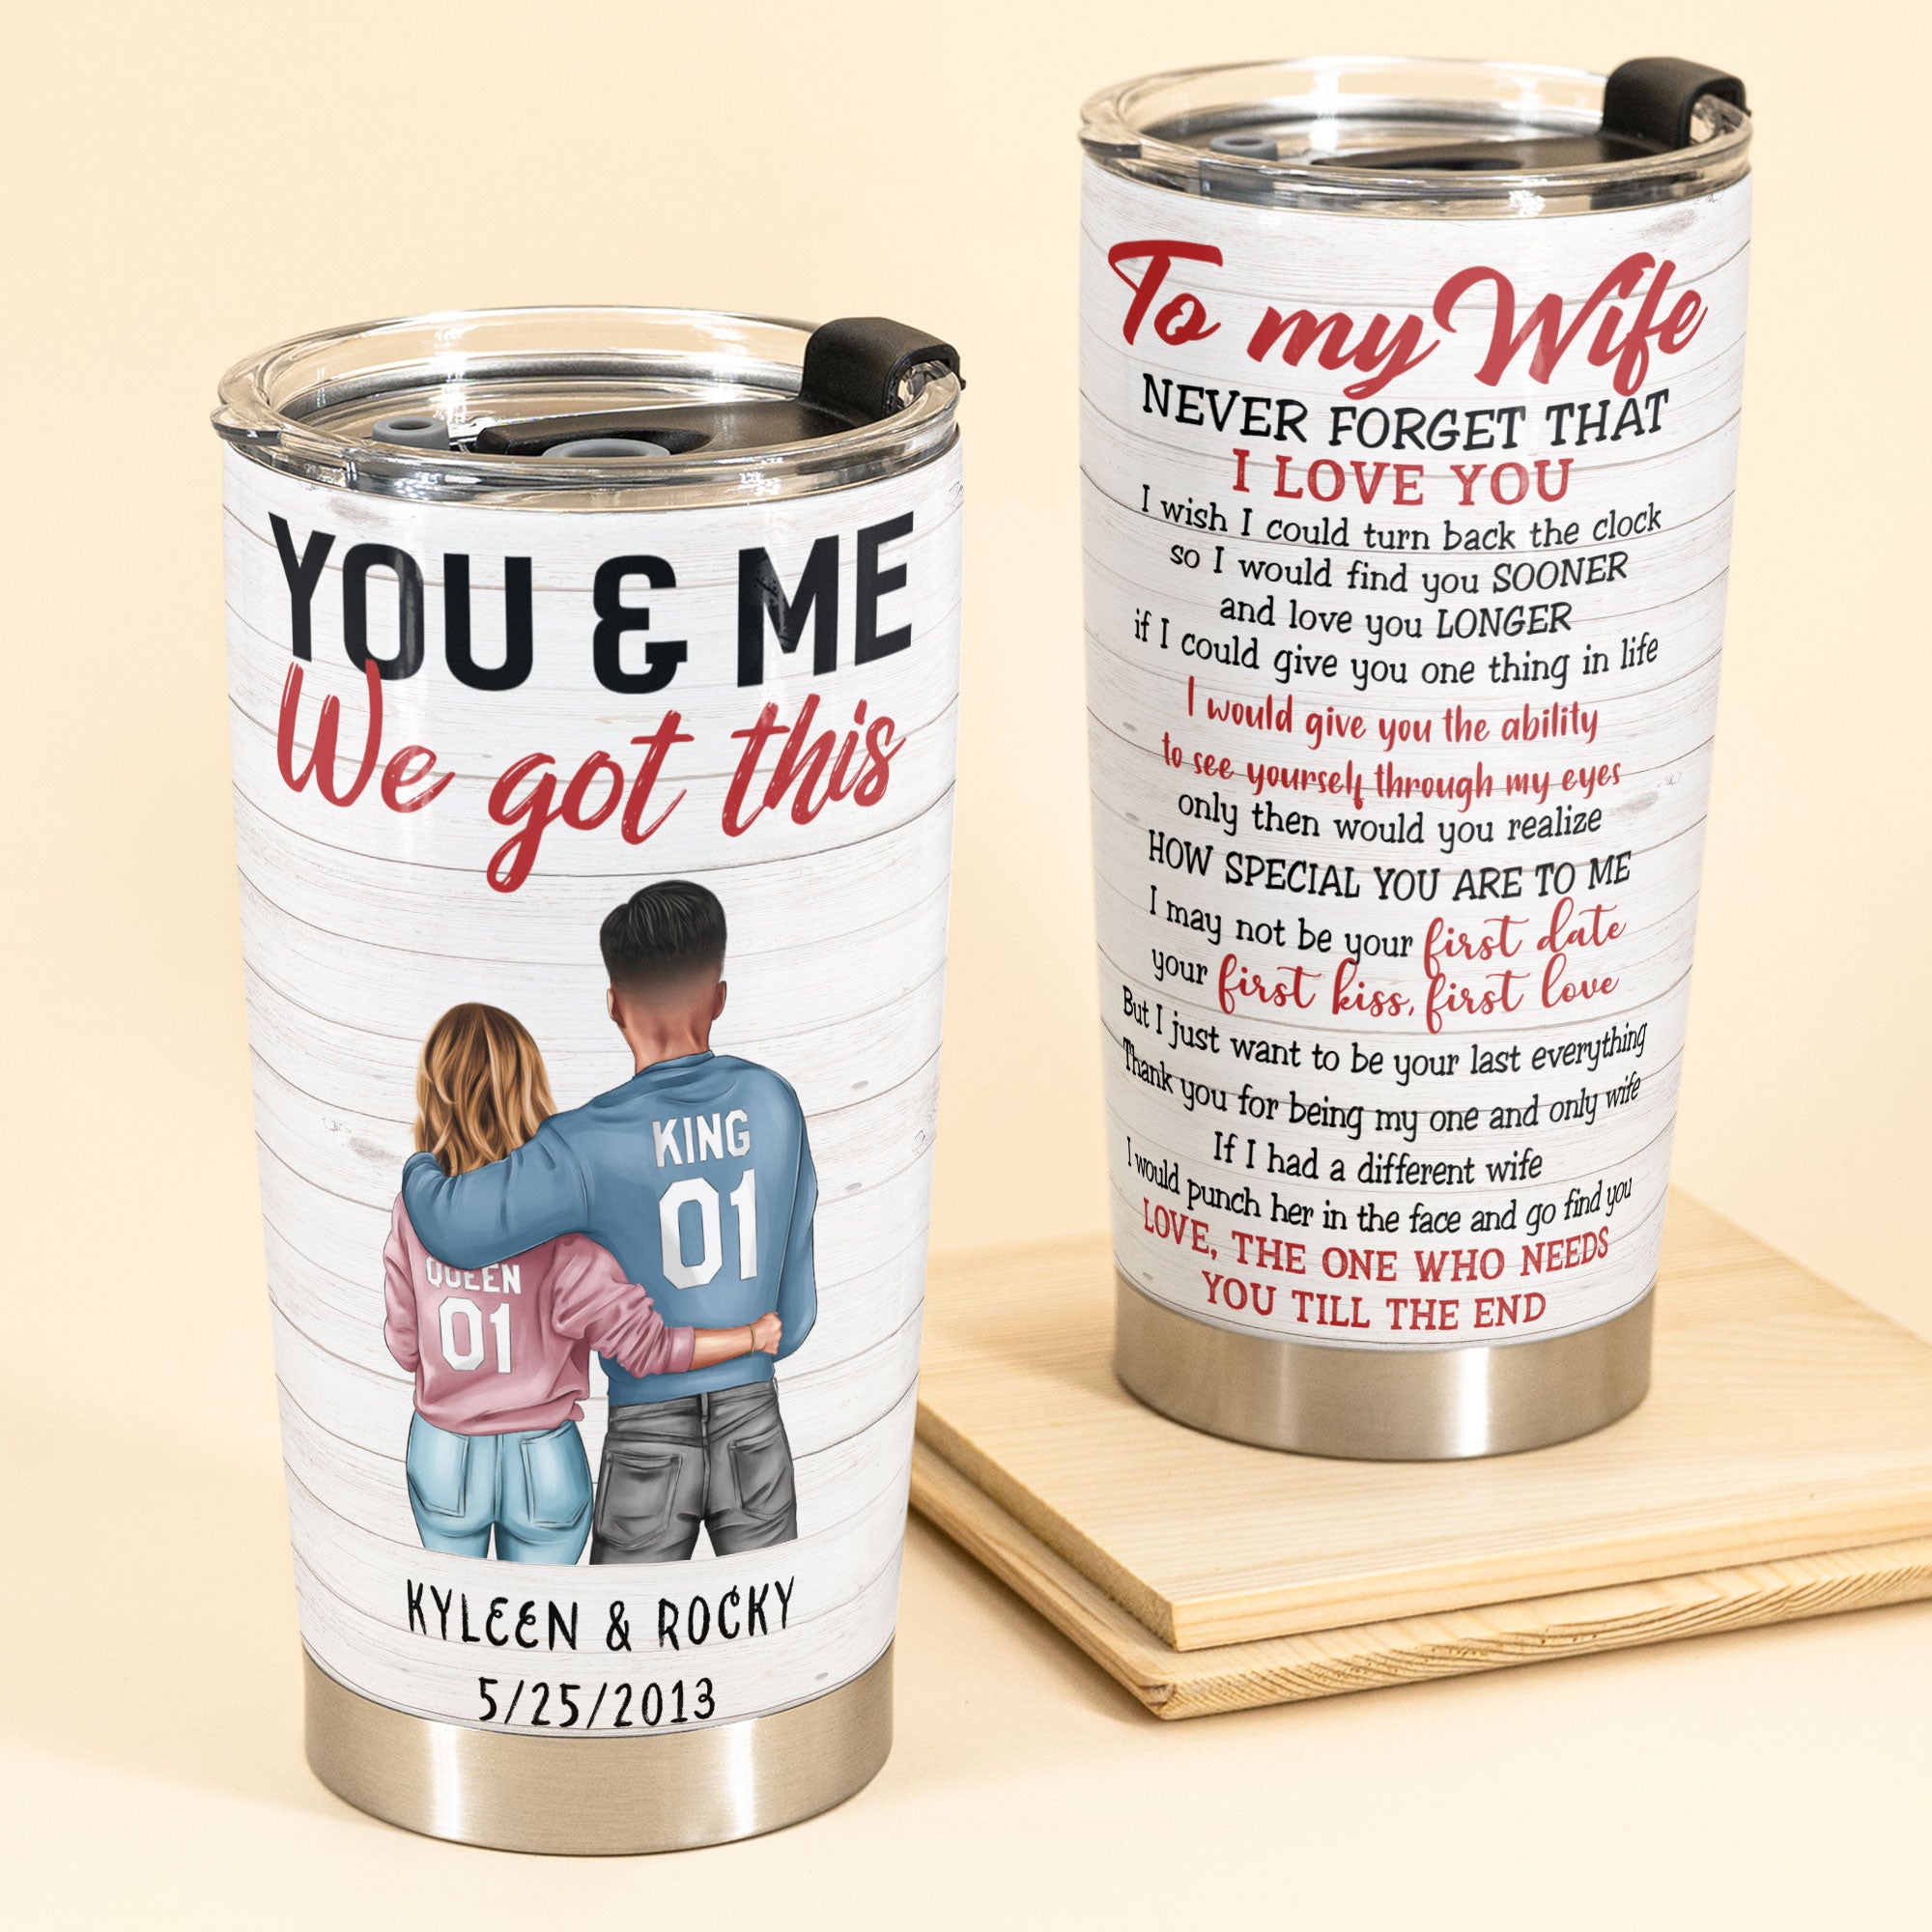 Reading Cup - Personalized 40oz Tumbler With Straw – Macorner